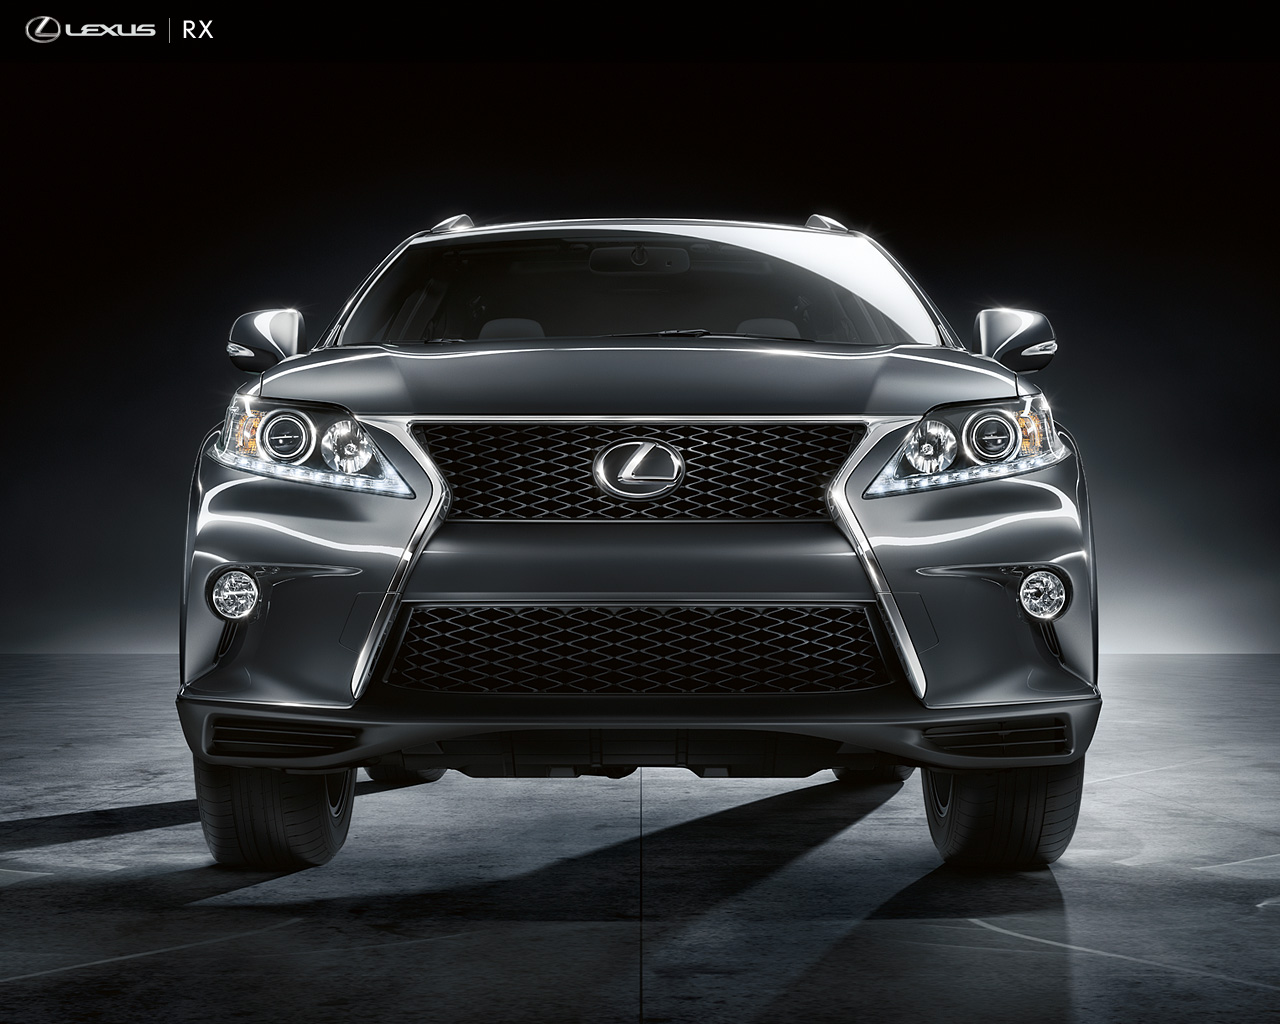 World's Beautiful Cars: Lexus RX 2013 SUV Photos and Wallpapers